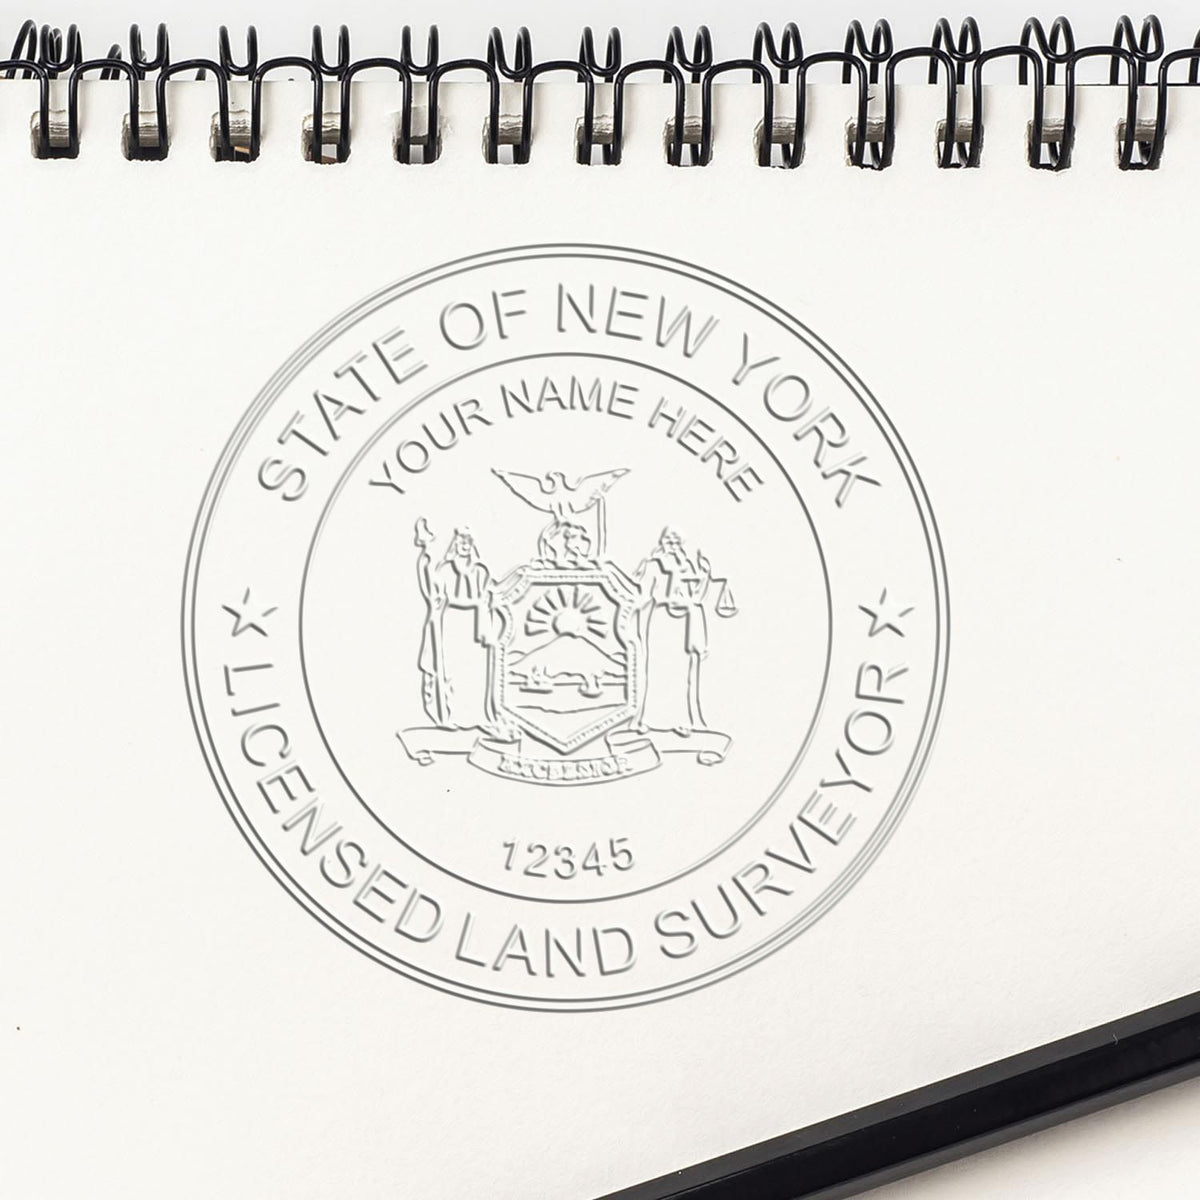 A photograph of the Hybrid New York Land Surveyor Seal stamp impression reveals a vivid, professional image of the on paper.